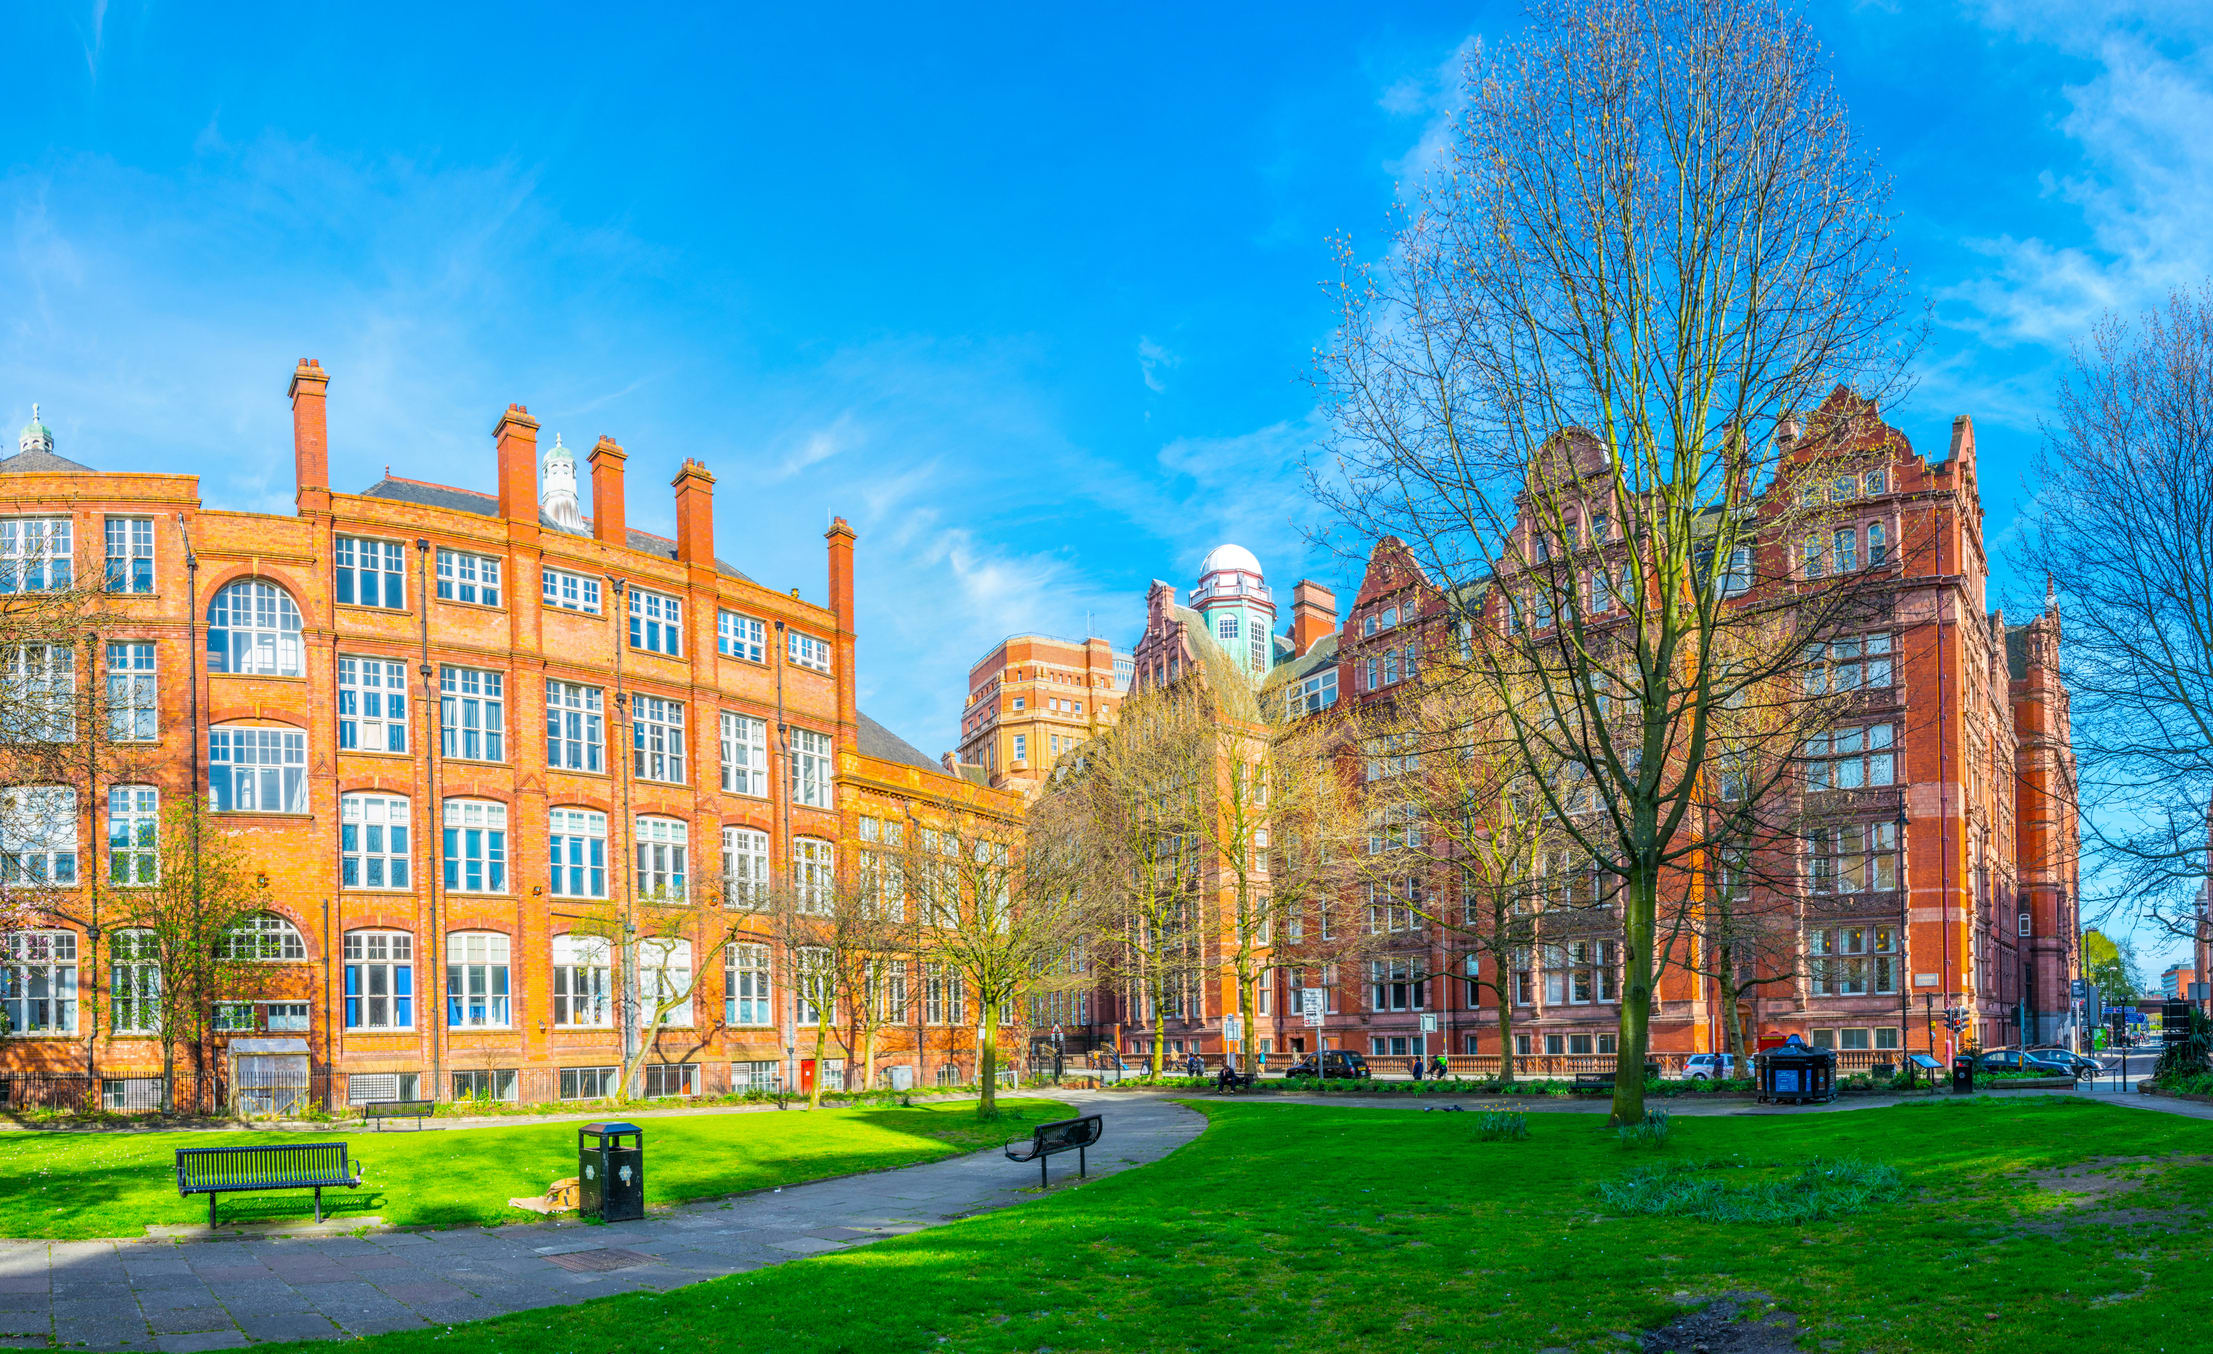 View of the sackville gardens next to the shena slmon campus in Manchester, England